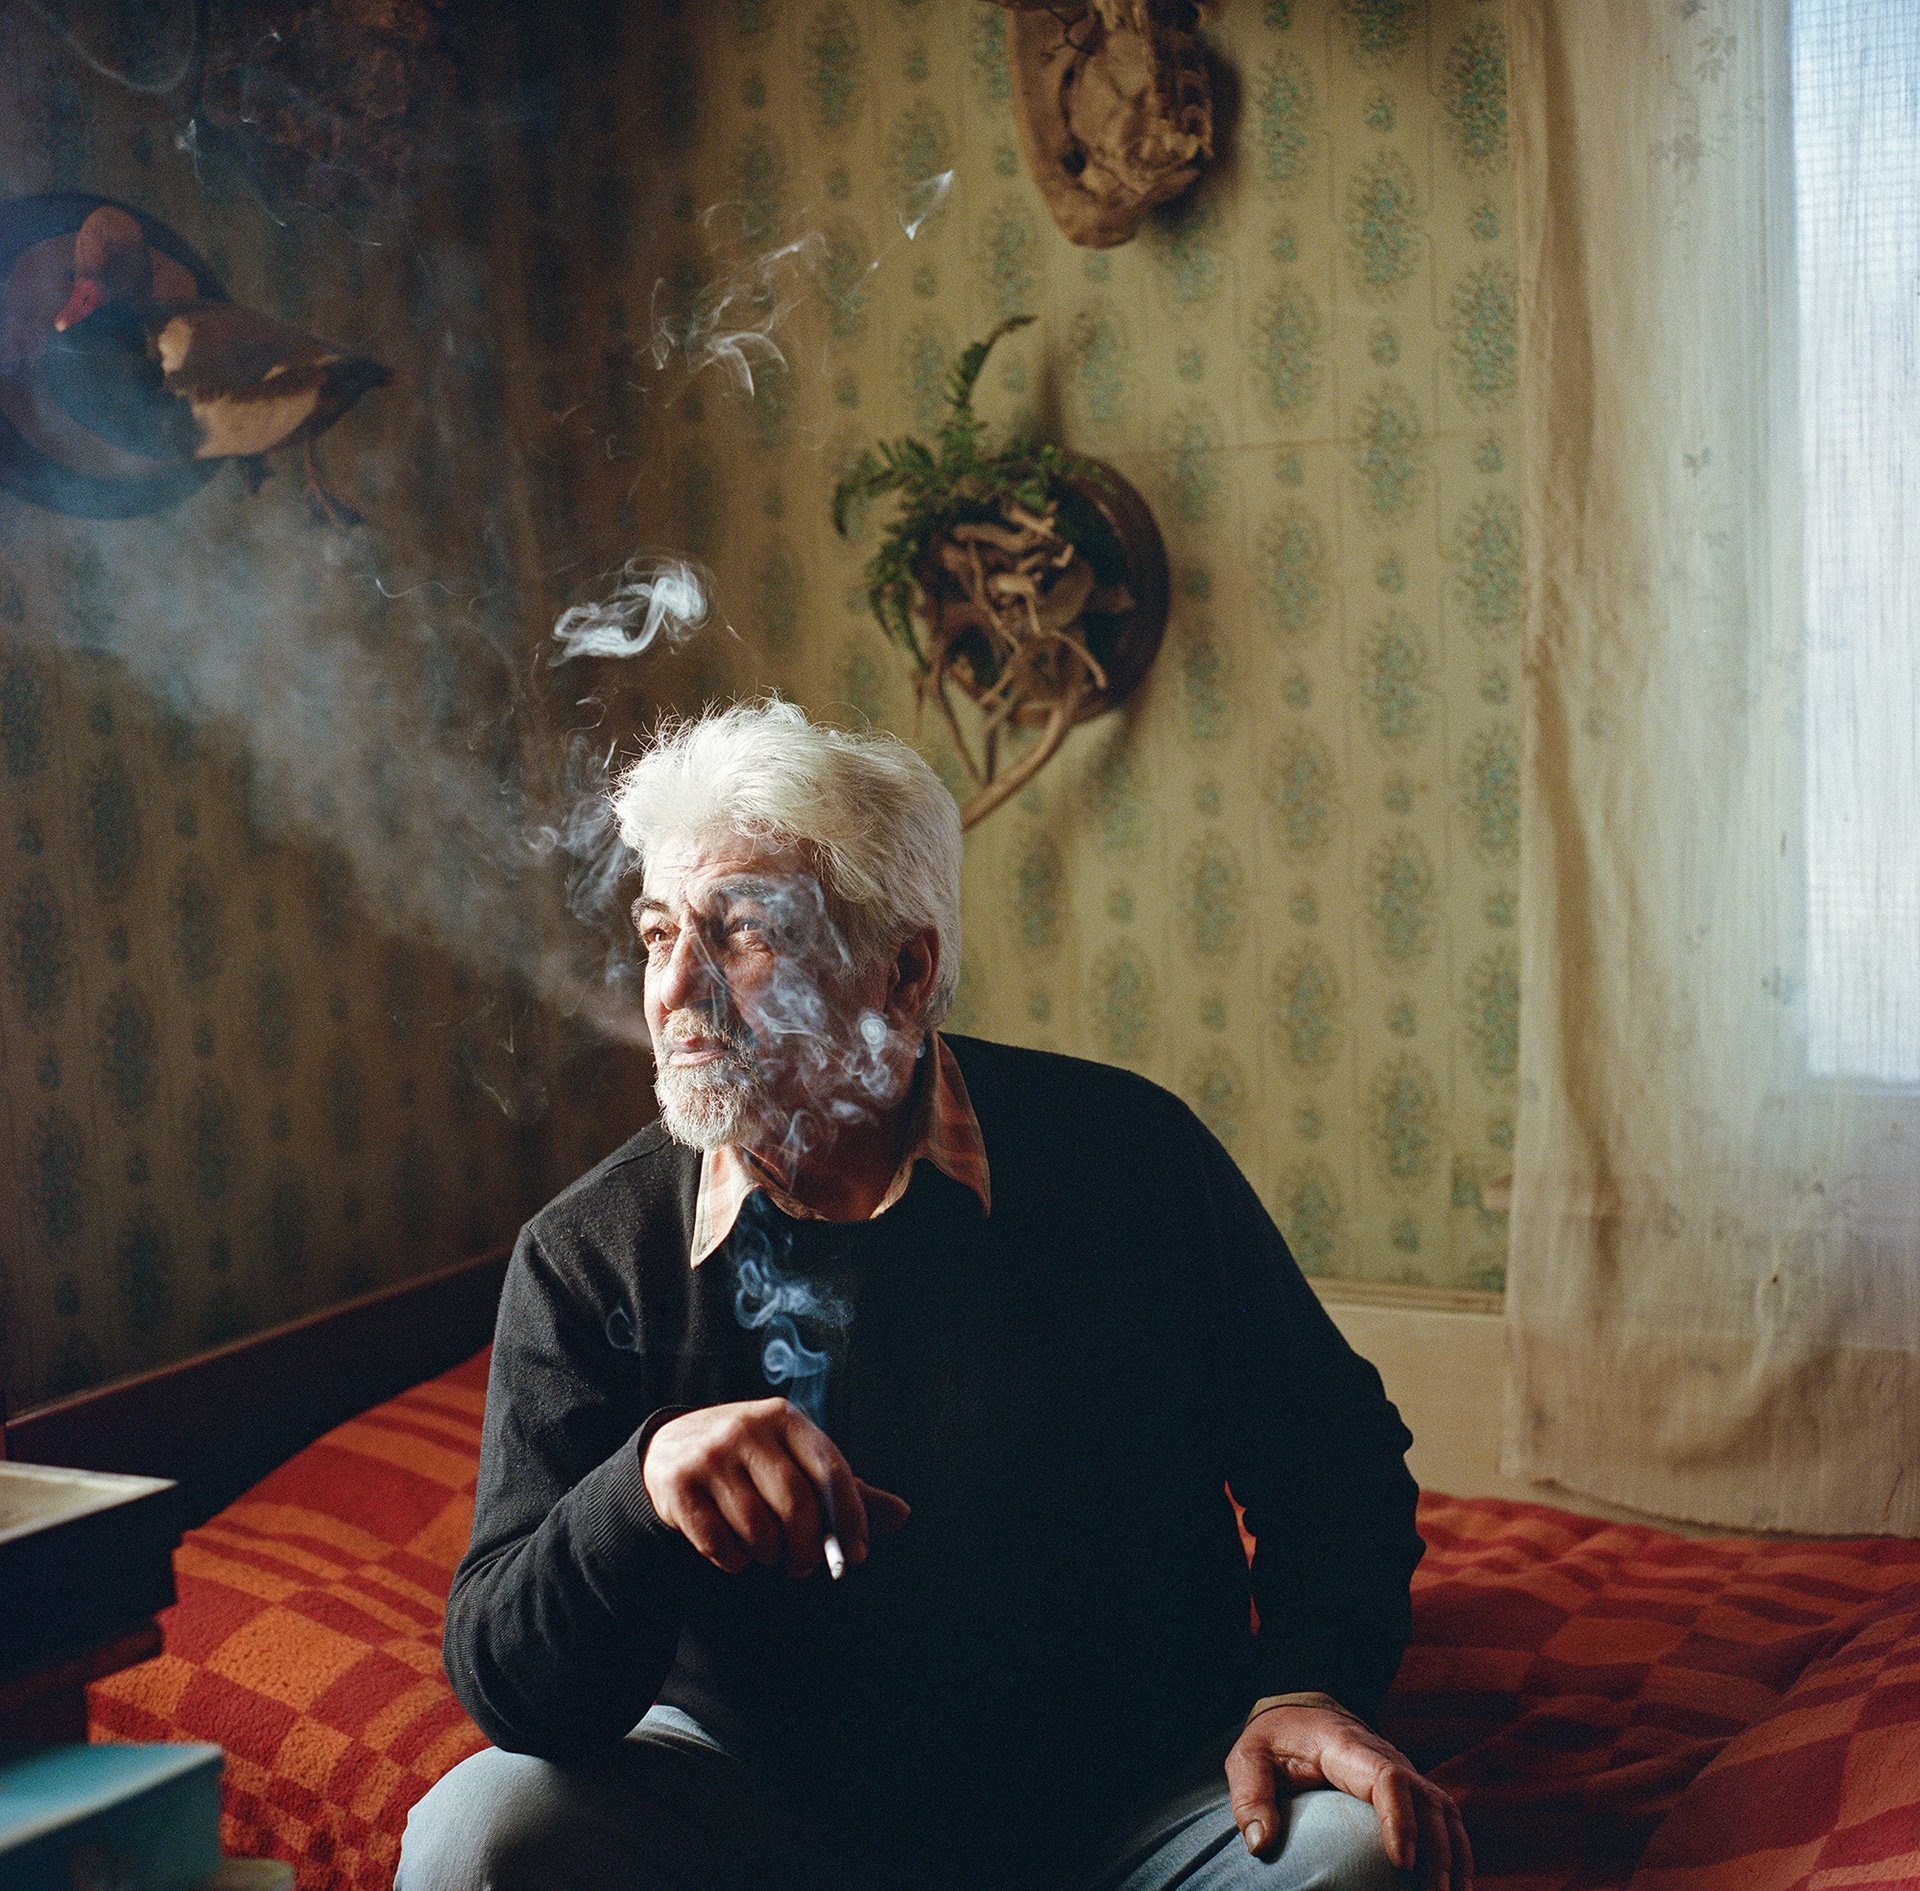 Rustam Effendi&rsquo;s friend and protégé, Parkev Kazarian, an ethnic Armenian refugee from Baku, Azerbaijan, in his home in a village near Gyumri, Armenia. For more than a decade, Effendi and Kazarian went on butterfly hunting trips together.